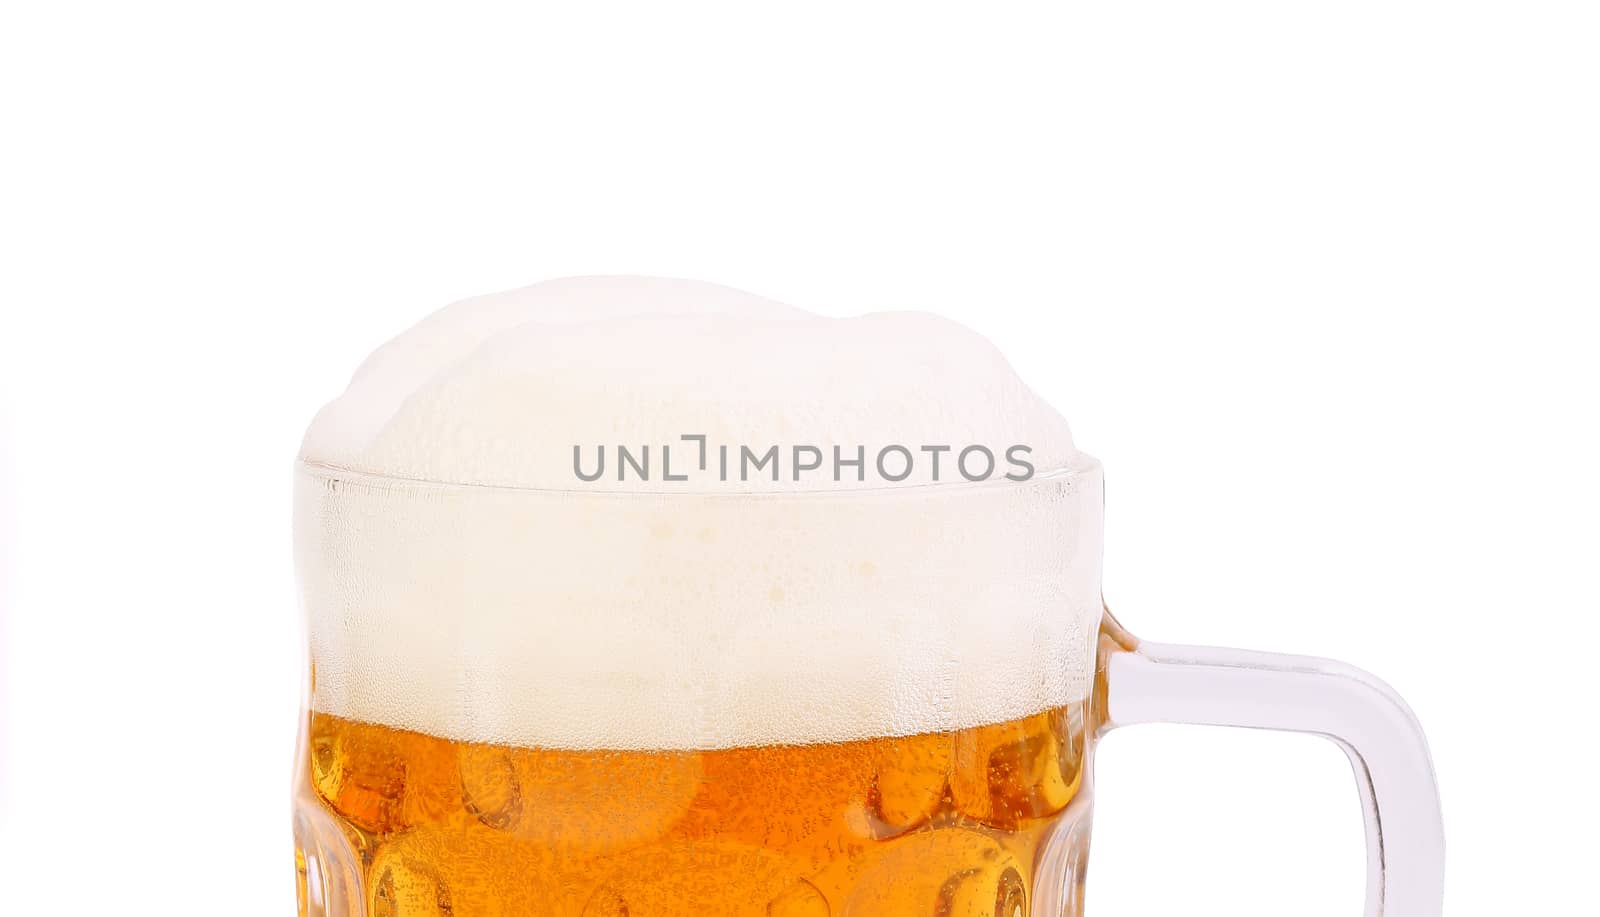 Top froth on the mug of beer isolated on white by indigolotos